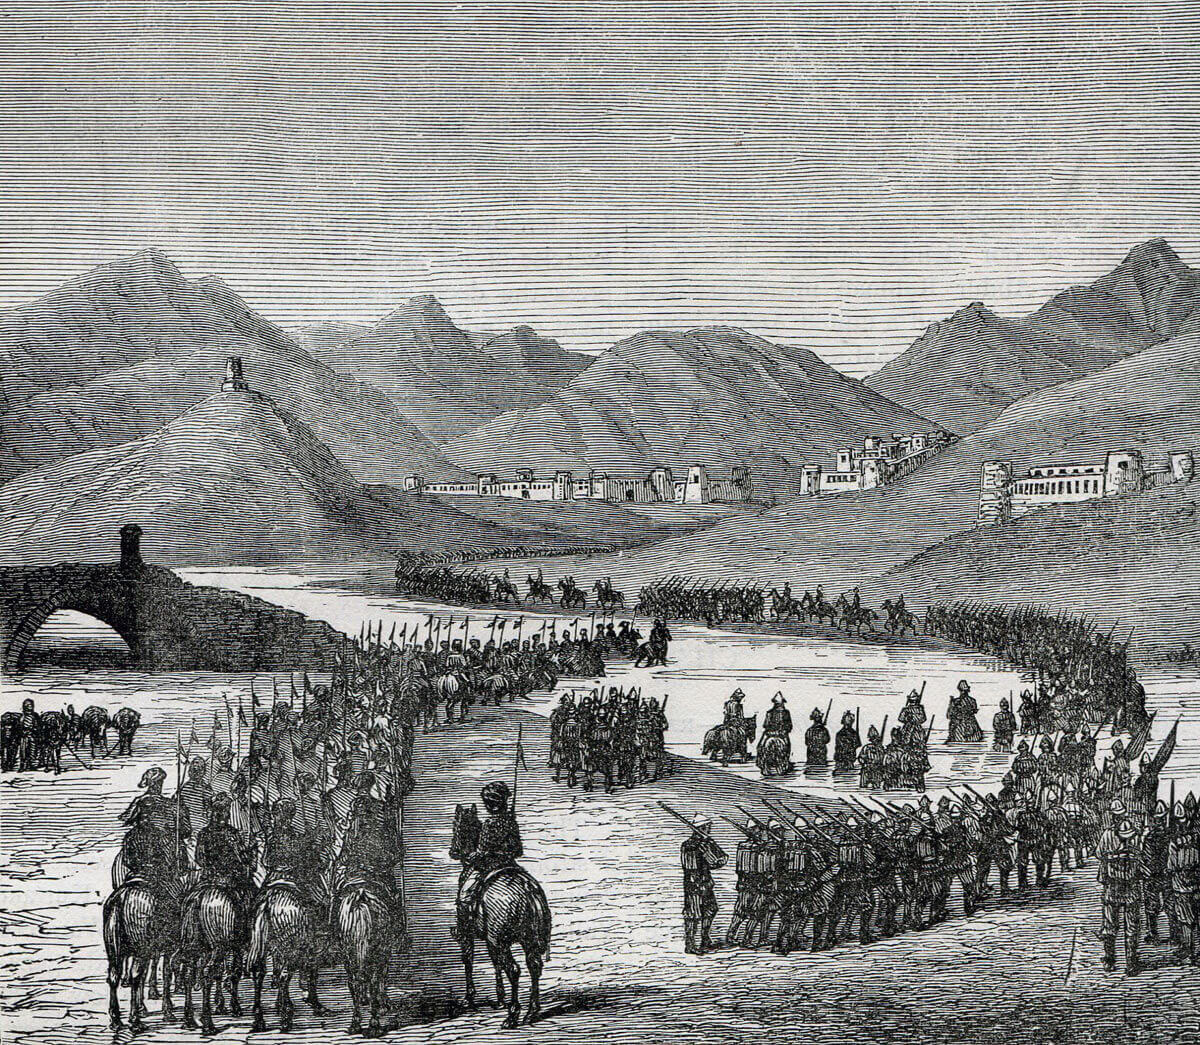 General Ross's division crossing the Logar River, marching to meet General Stewart's division: Battle of Ahmed Khel on 19th April 1880 in the Second Afghan War